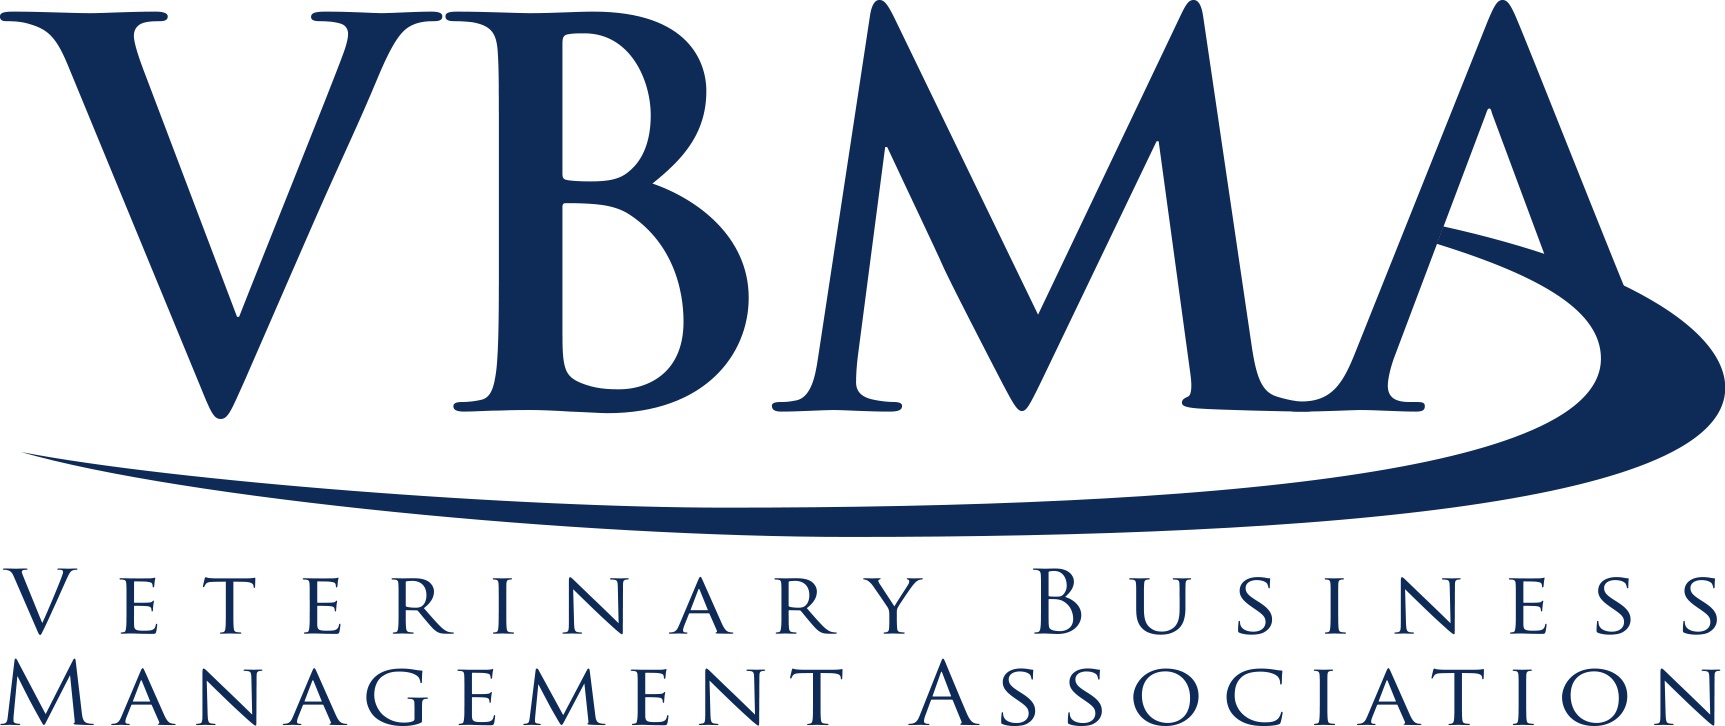 VBMA Dues - 4 Years + Free Business Cards